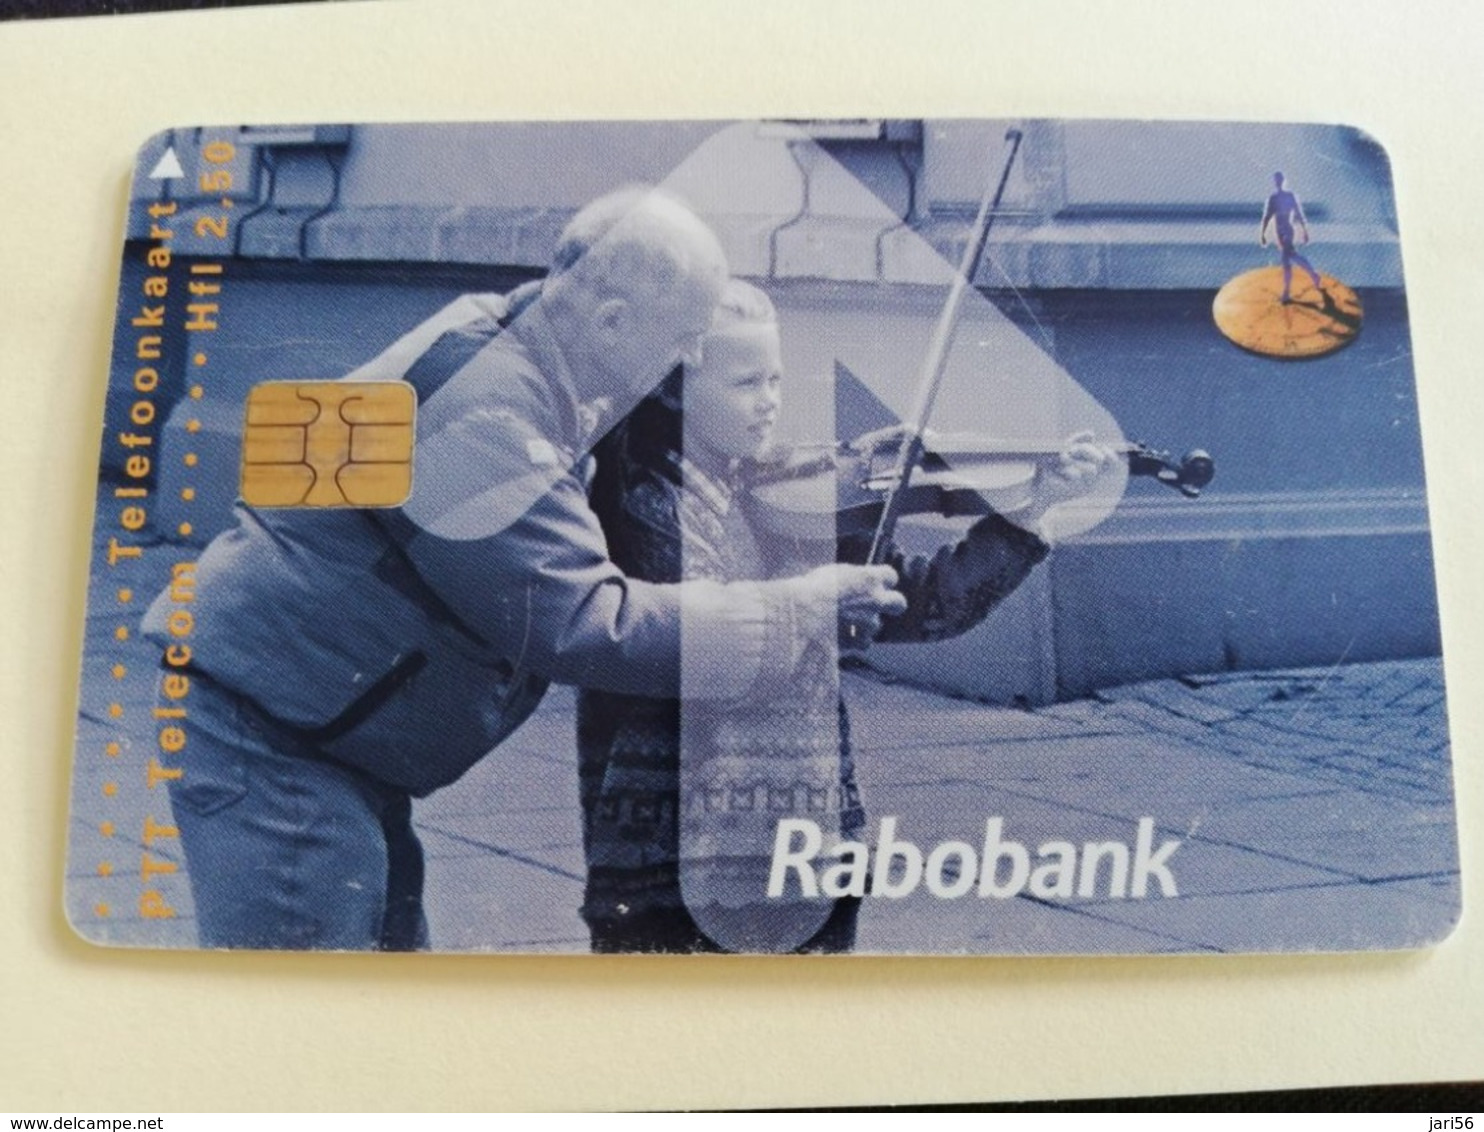 NETHERLANDS  ADVERTISING CHIPCARD HFL 2,50   CRD 378.04   RABOBANK  VIOOL            Fine Used   ** 3214** - Privat